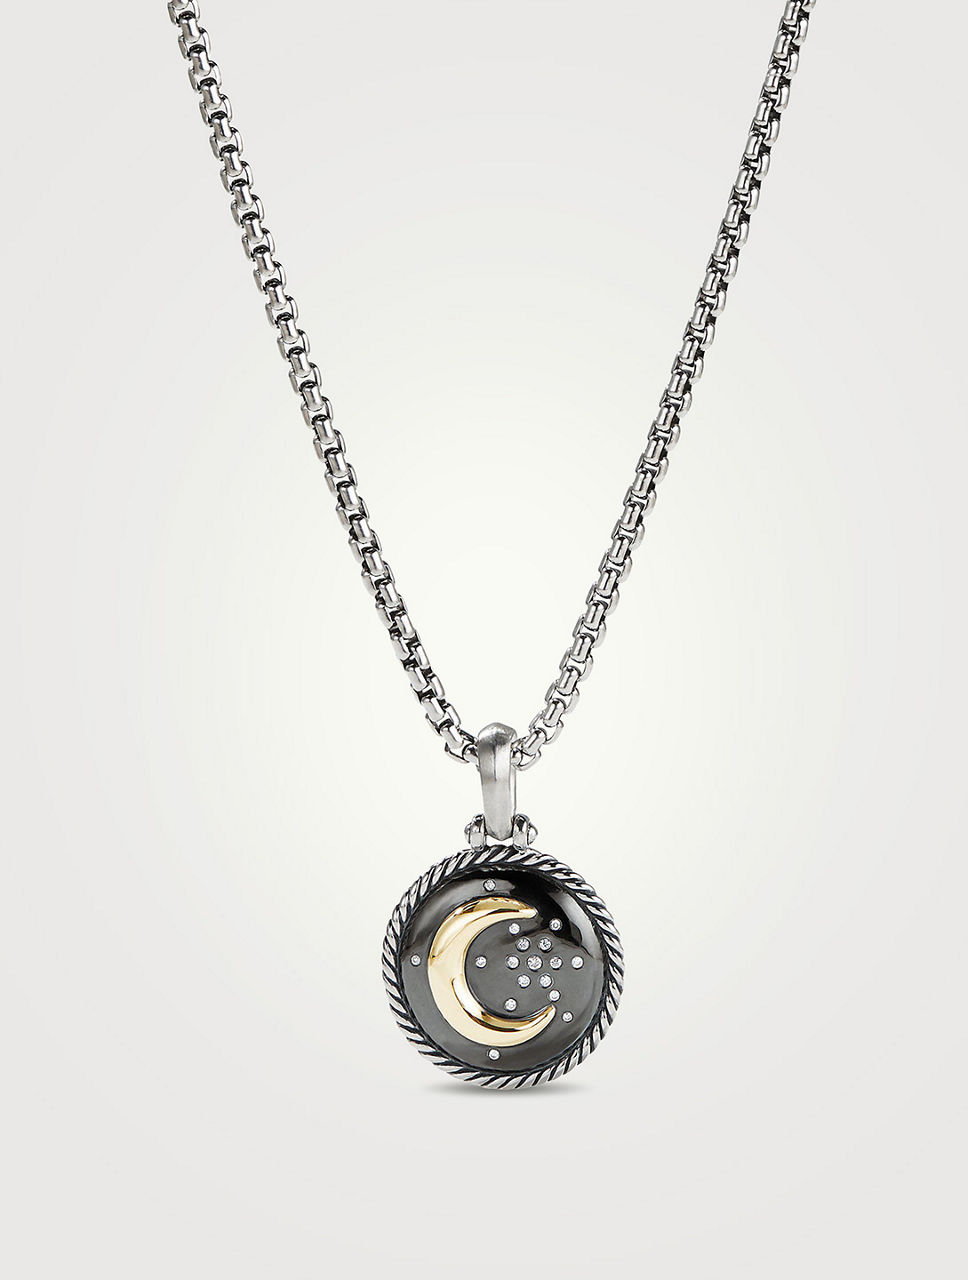 Moon And Star Amulet In Sterling Silver With 18k Yellow Gold And Diamonds, 21mm